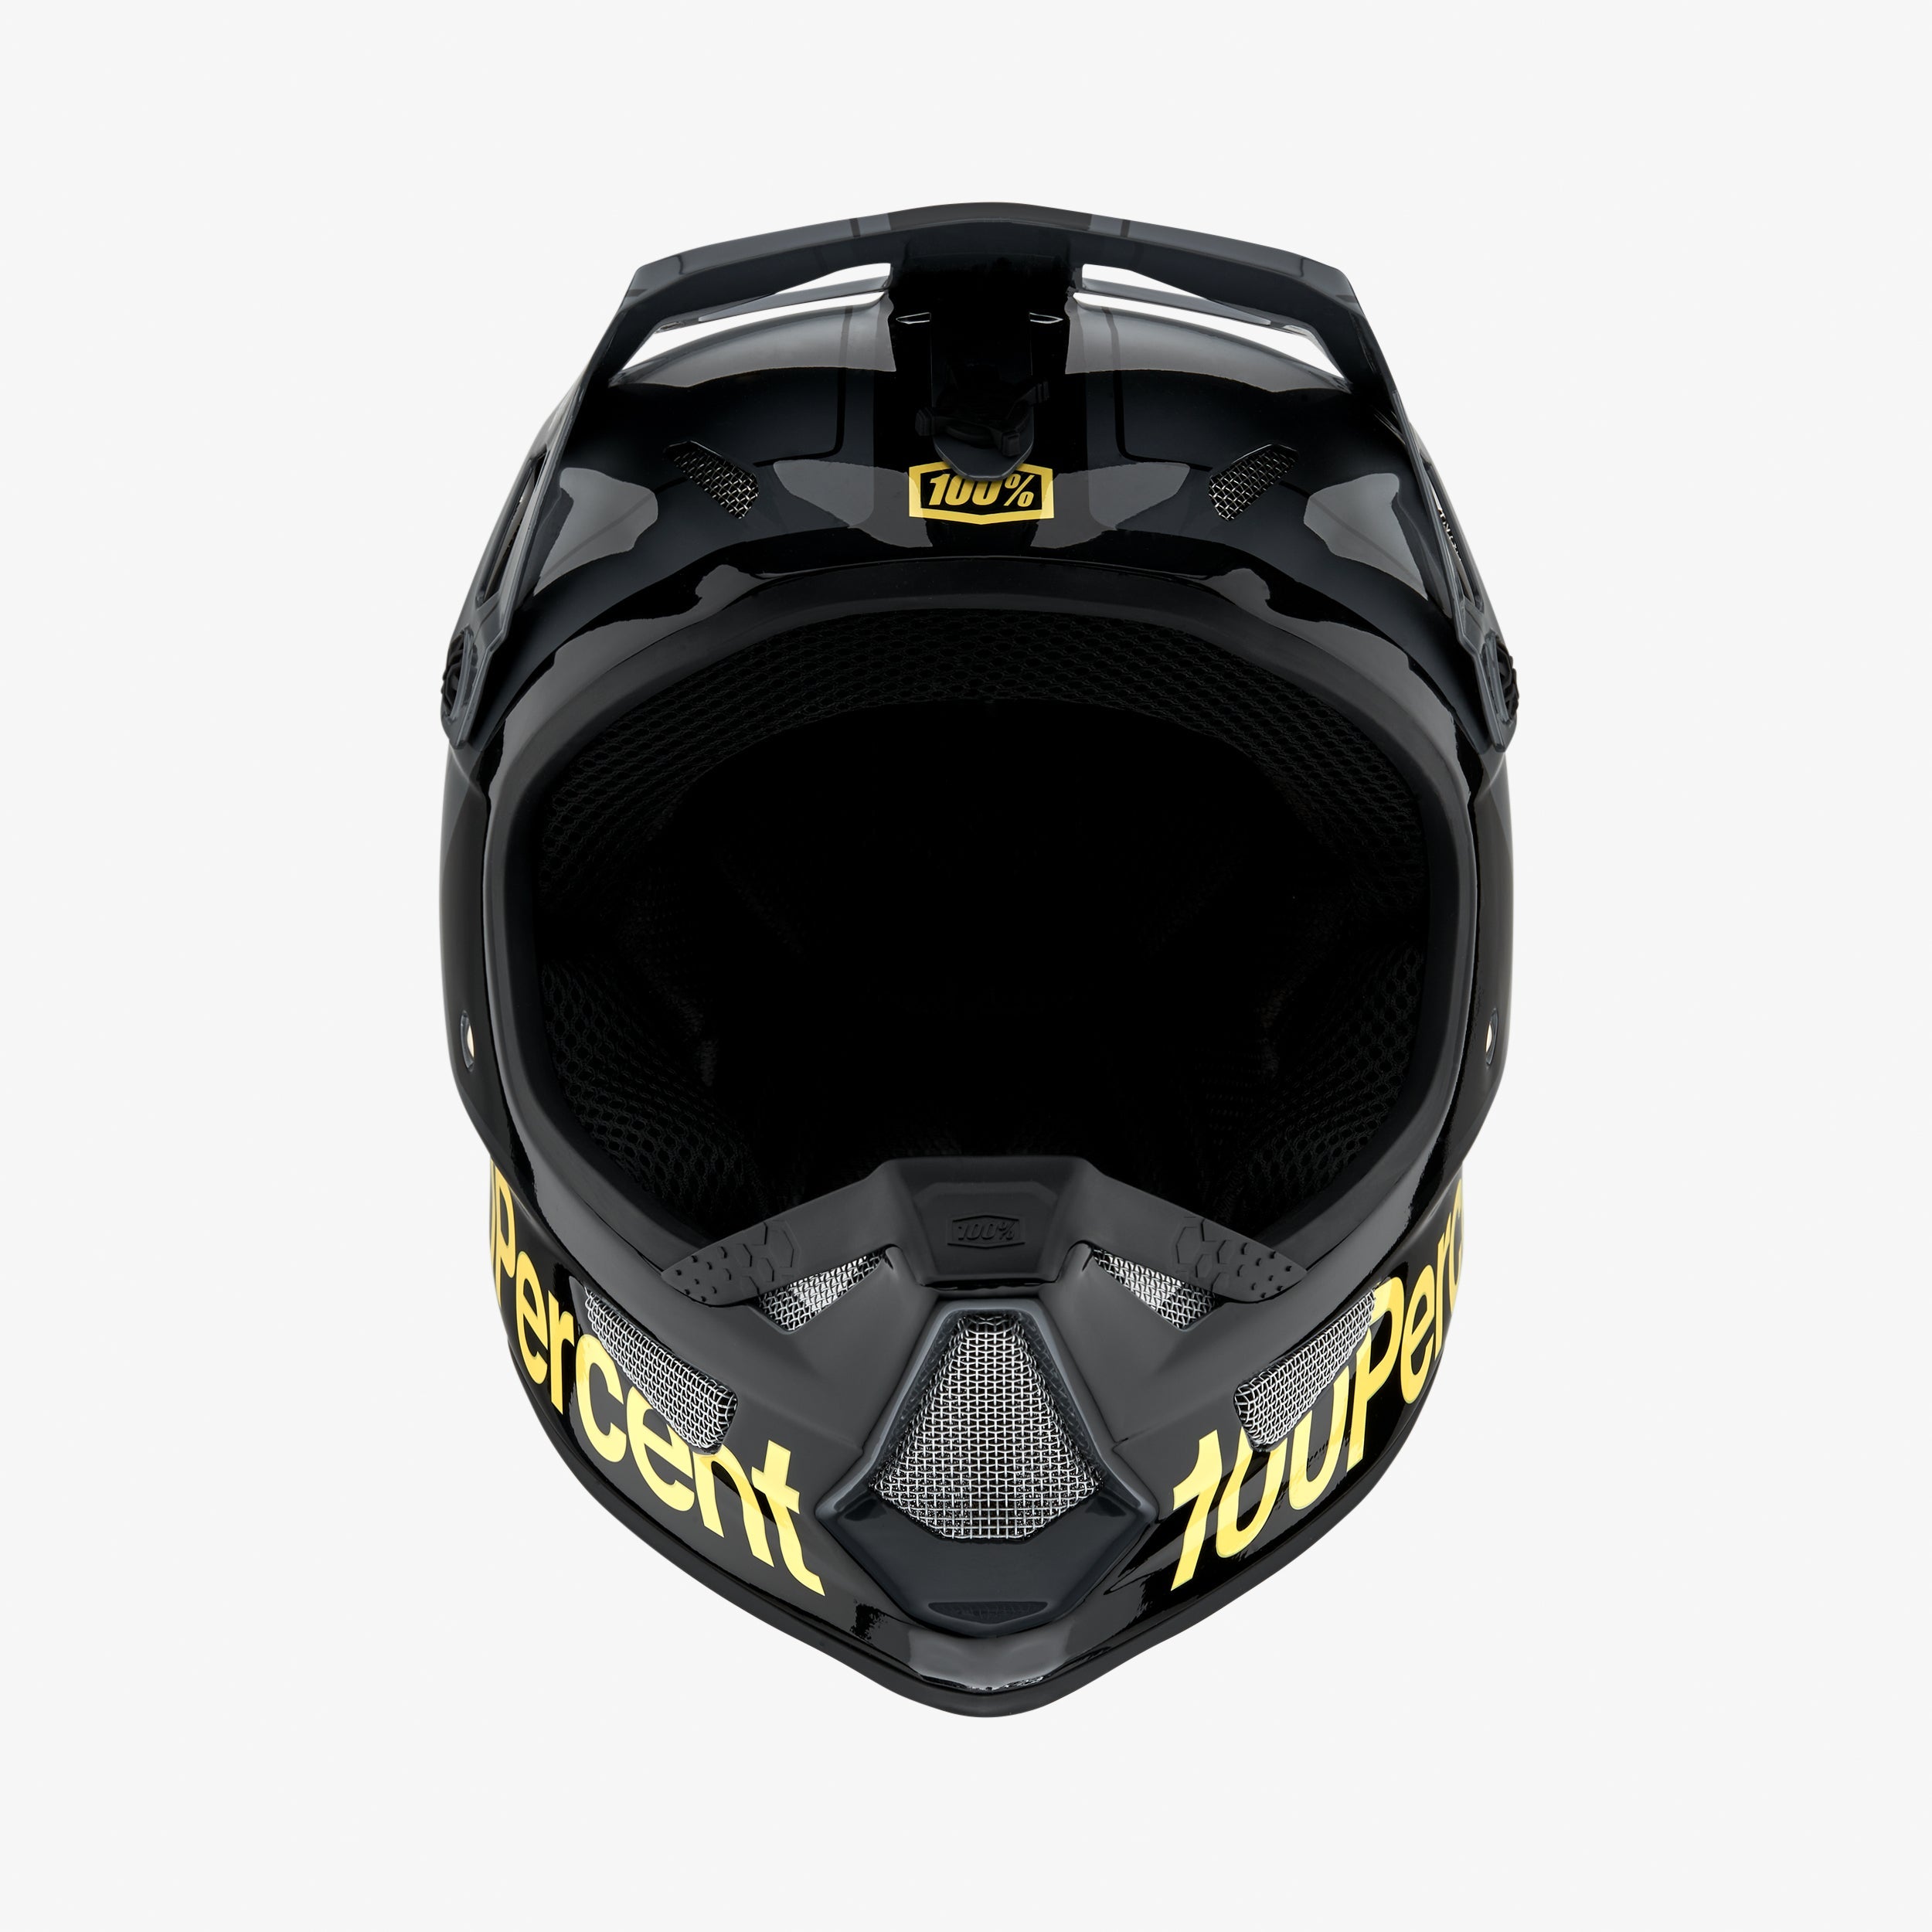 STATUS Helmet Carby/Charcoal - Secondary